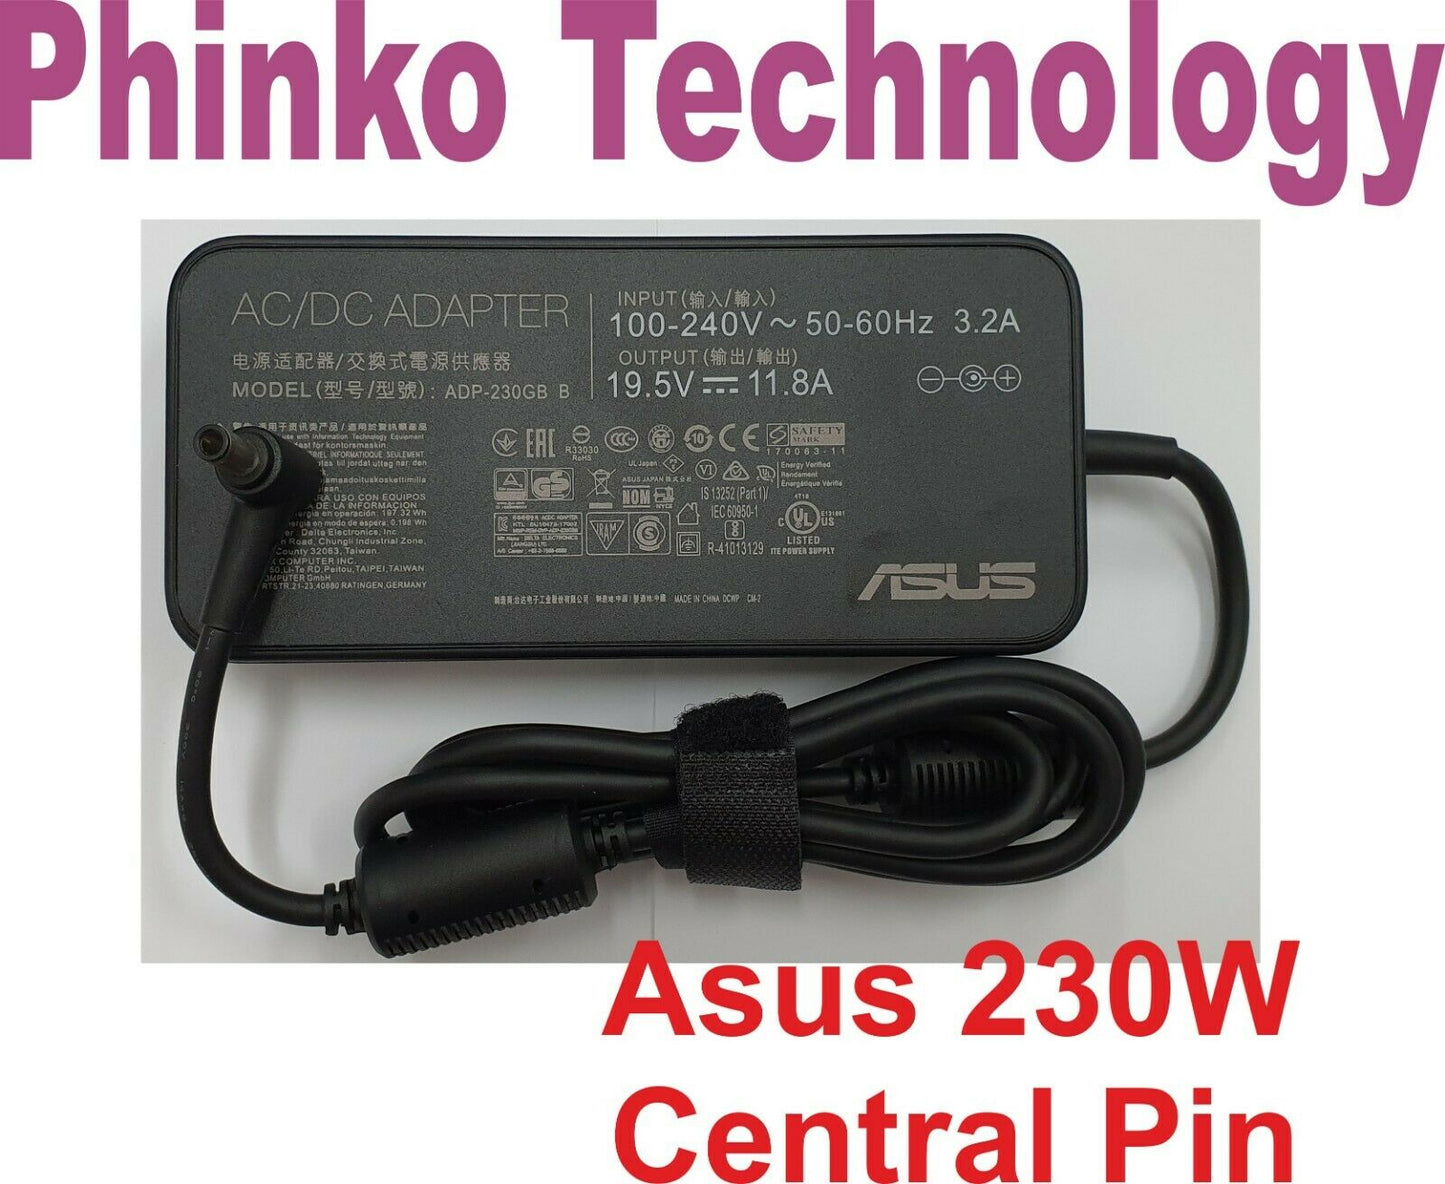 Genuine 230W Power Adapter Charger ASUS ROG ADP-230GB B 19.5V 11.8A 6.0 X 3.7mm